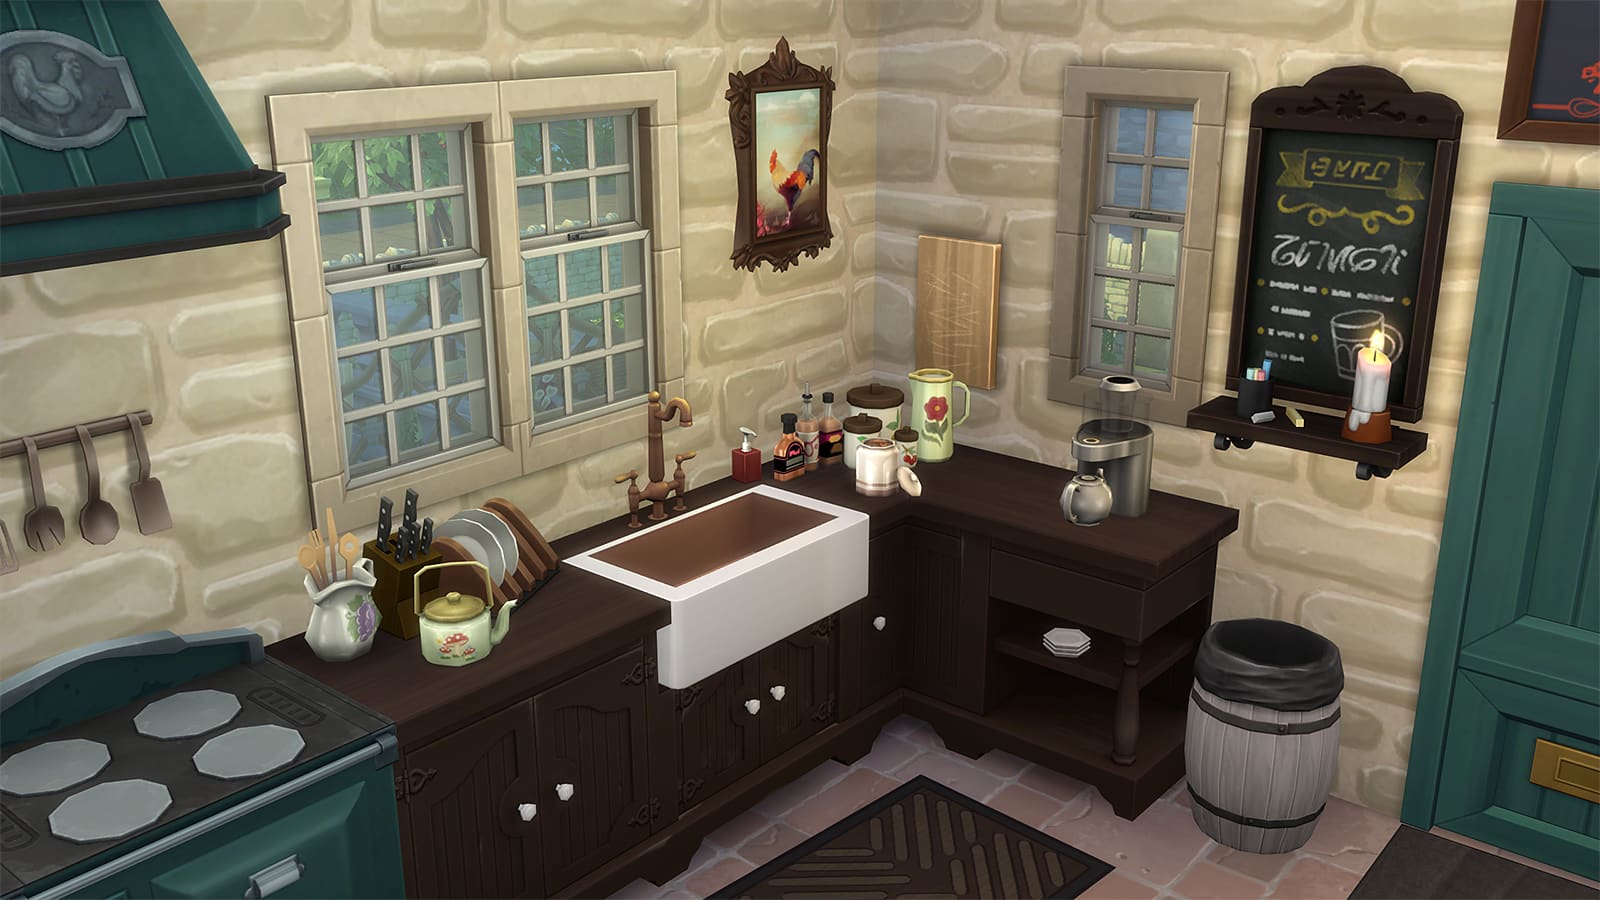 10+ Awesome Sims 4 Mods Like Free Expansion Packs — SNOOTYSIMS